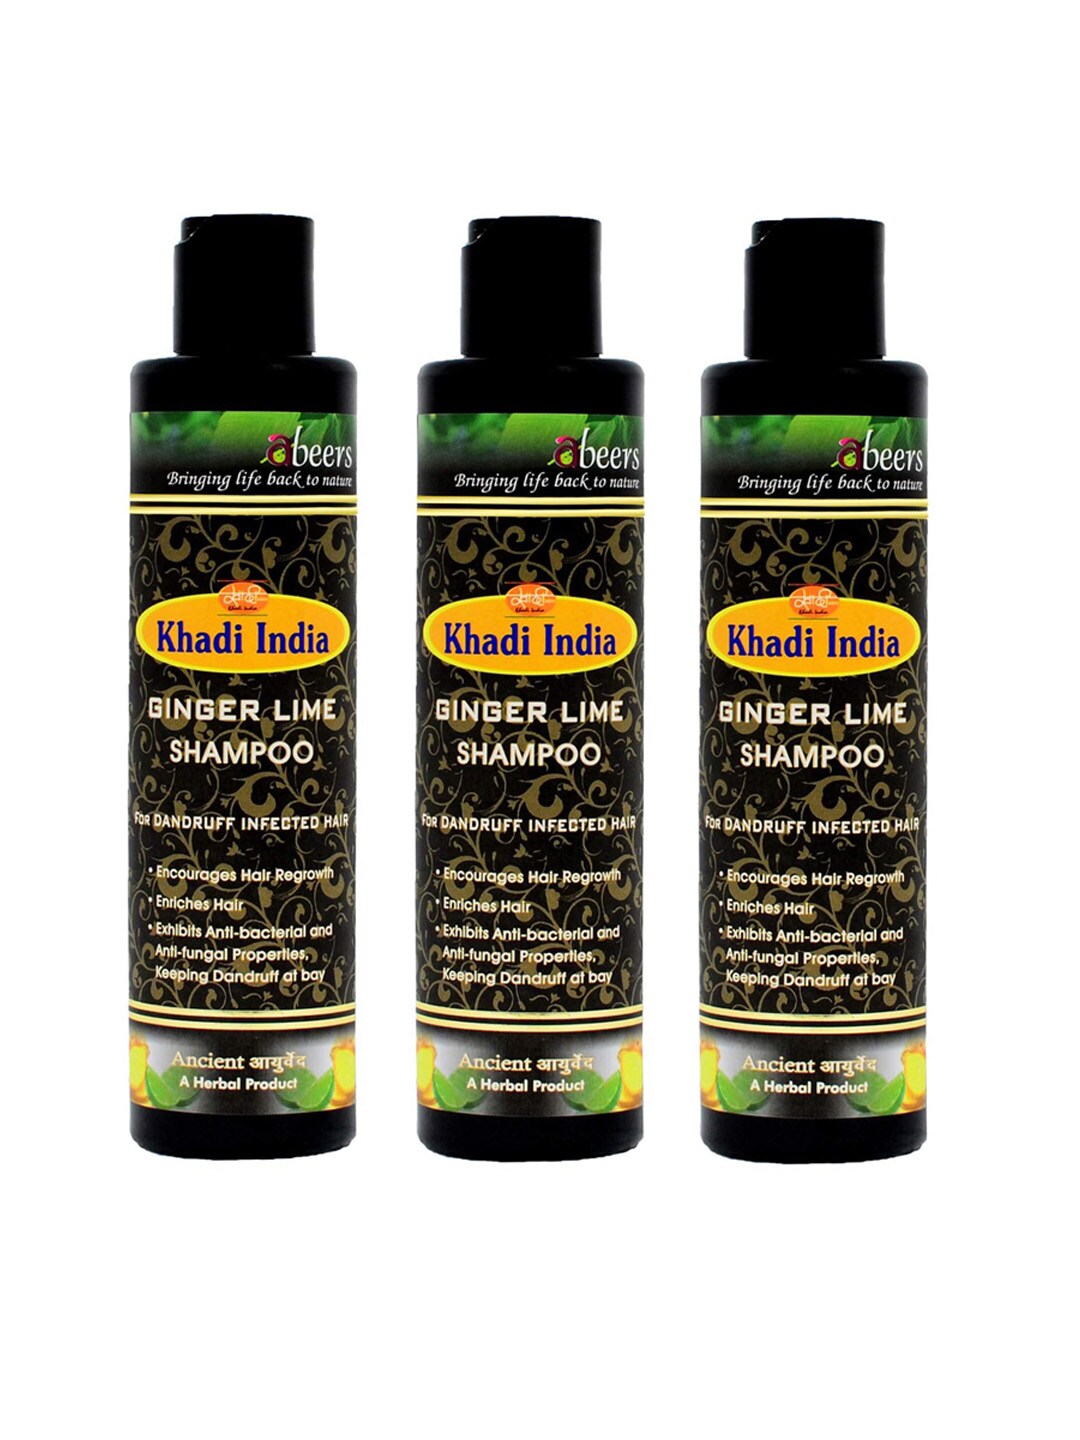 abeers Pack of 3 Ancient Ginger Lime Shampoo For Dnadruff Infected Hair 225ml Price in India